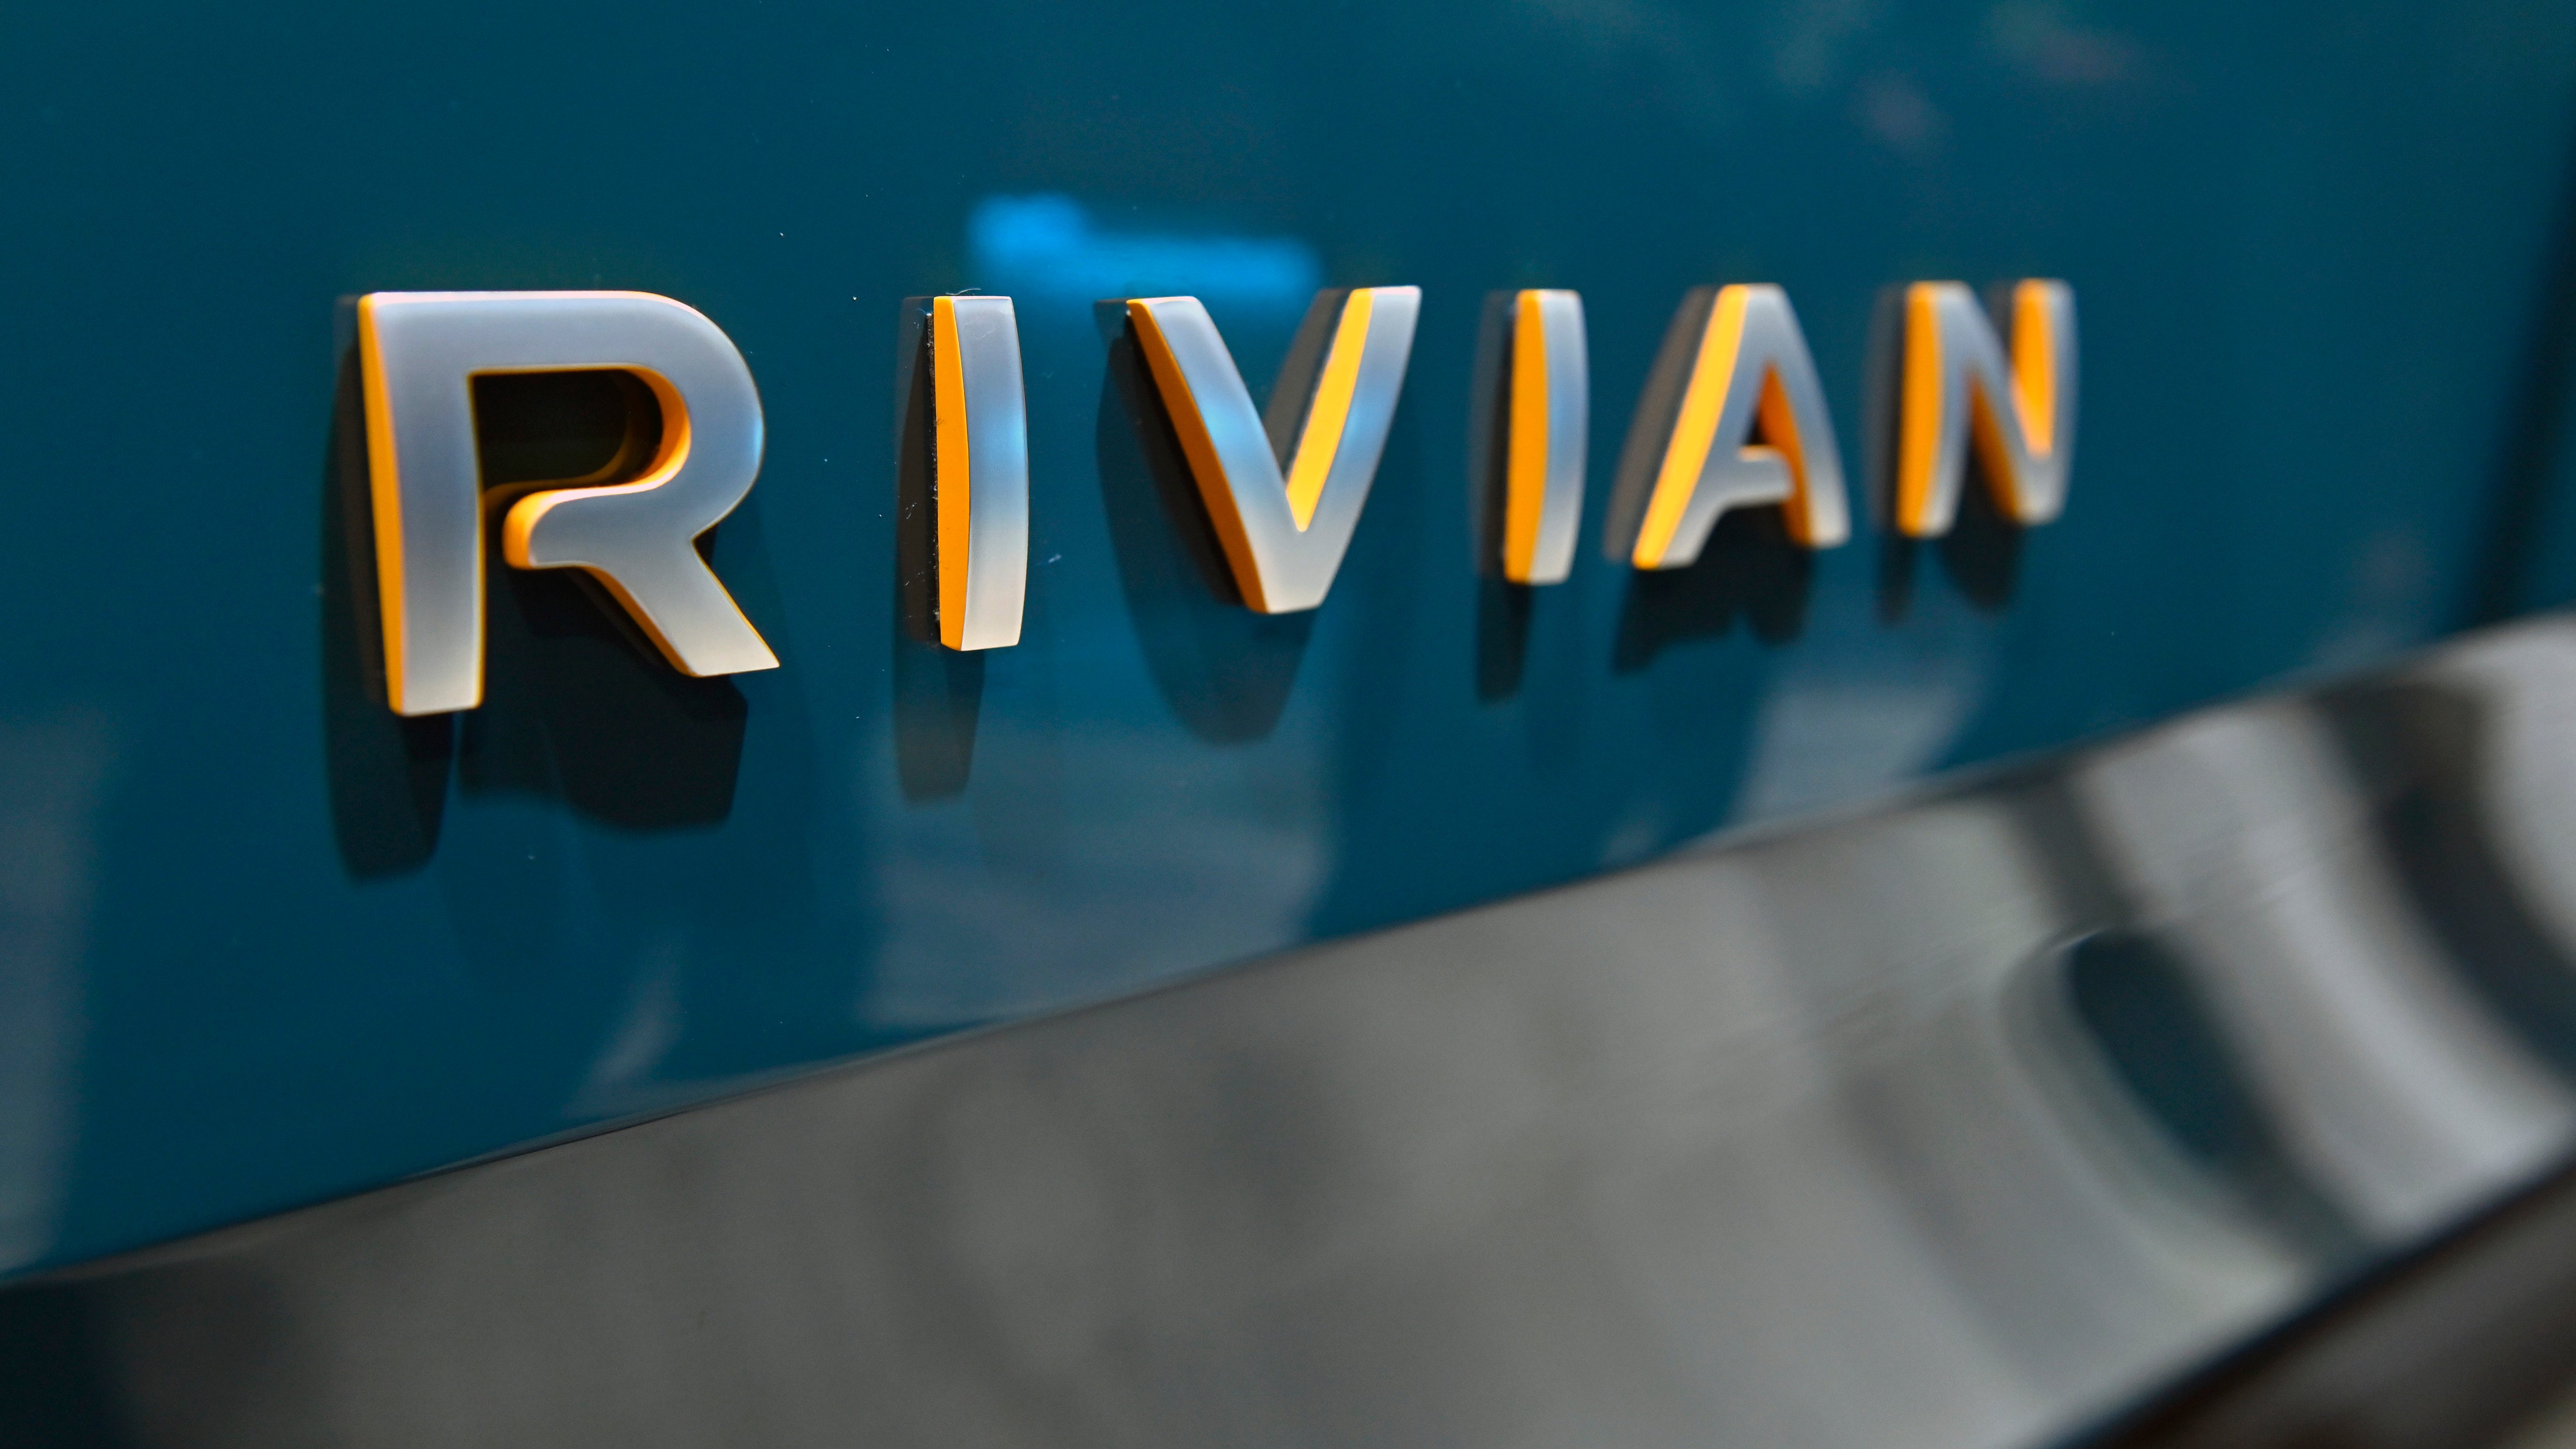 Rivian Stock Price Watch: Potential for Big Swings After Earnings Call Today (Dec 16th, 2021)